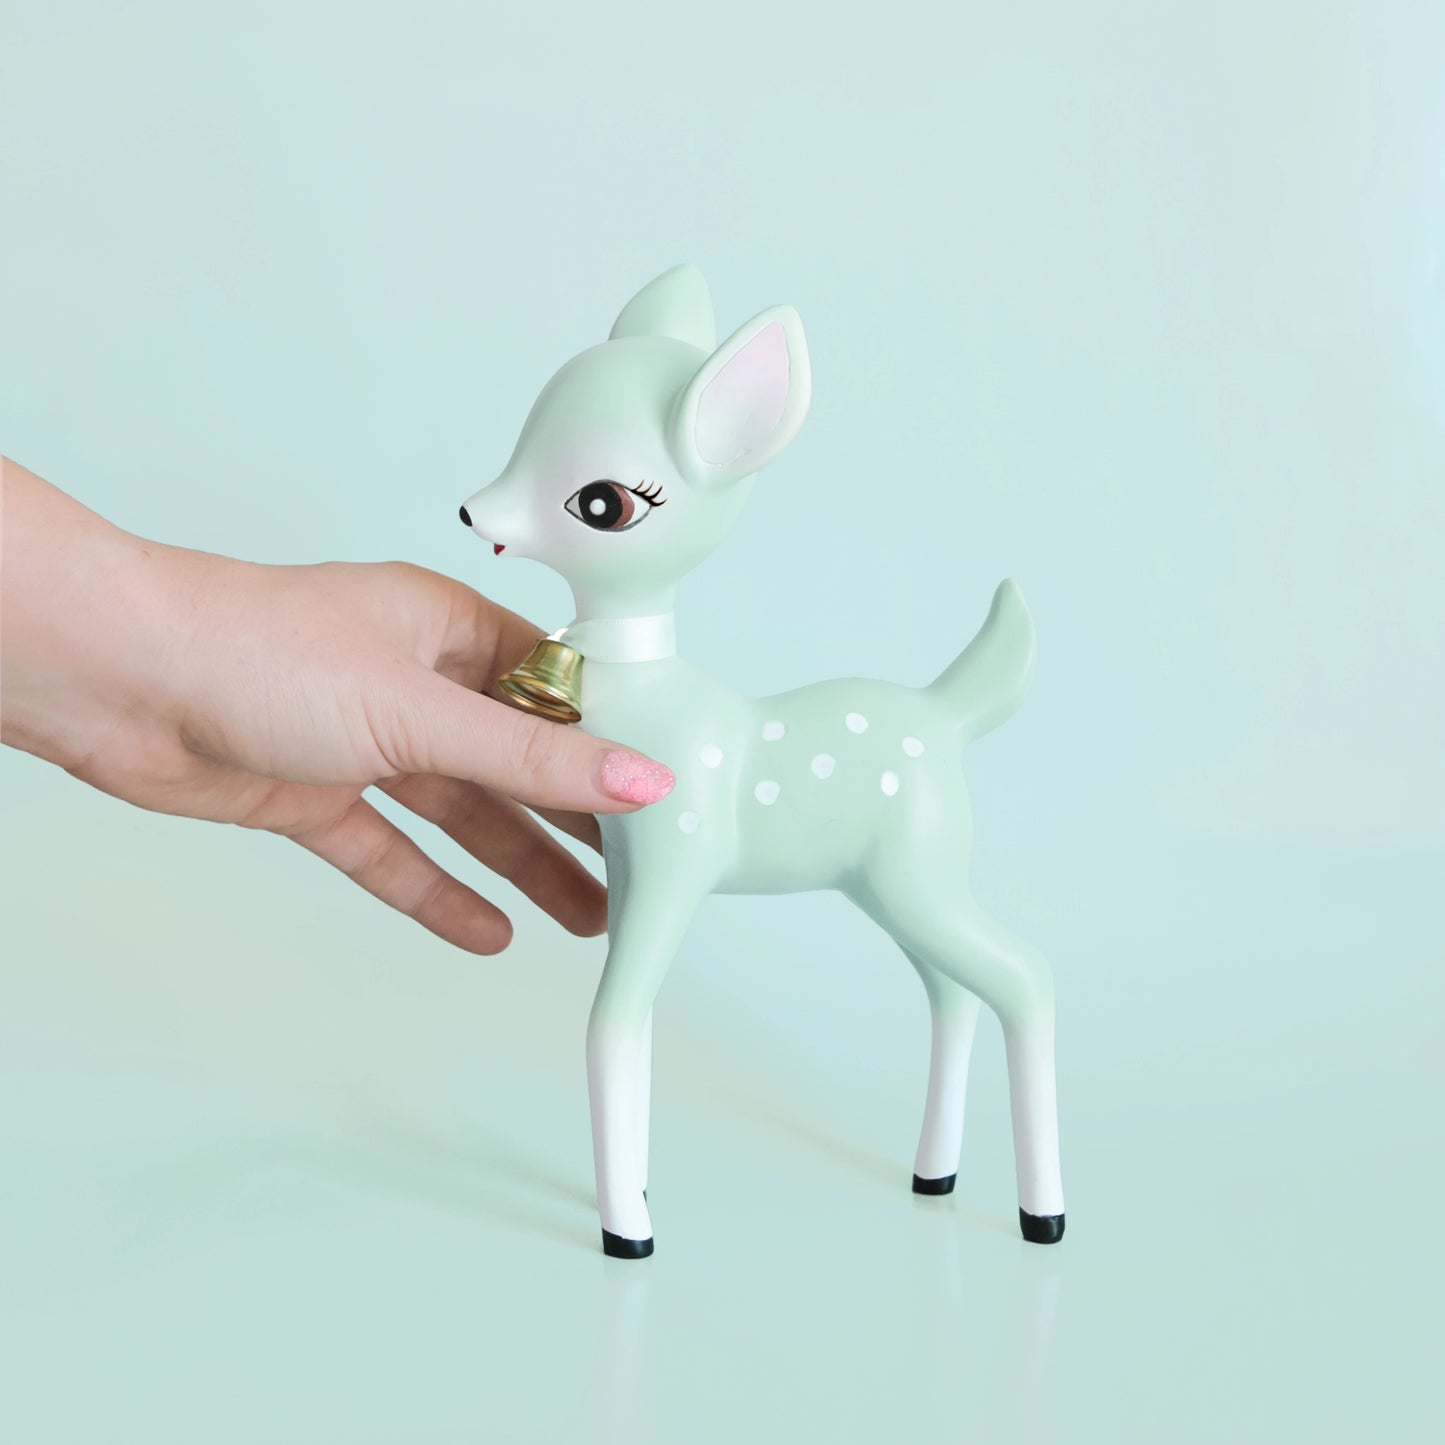 On a light blue background is a mint green retro deer figurine with white spot details and a gold bell at the front of its neck.